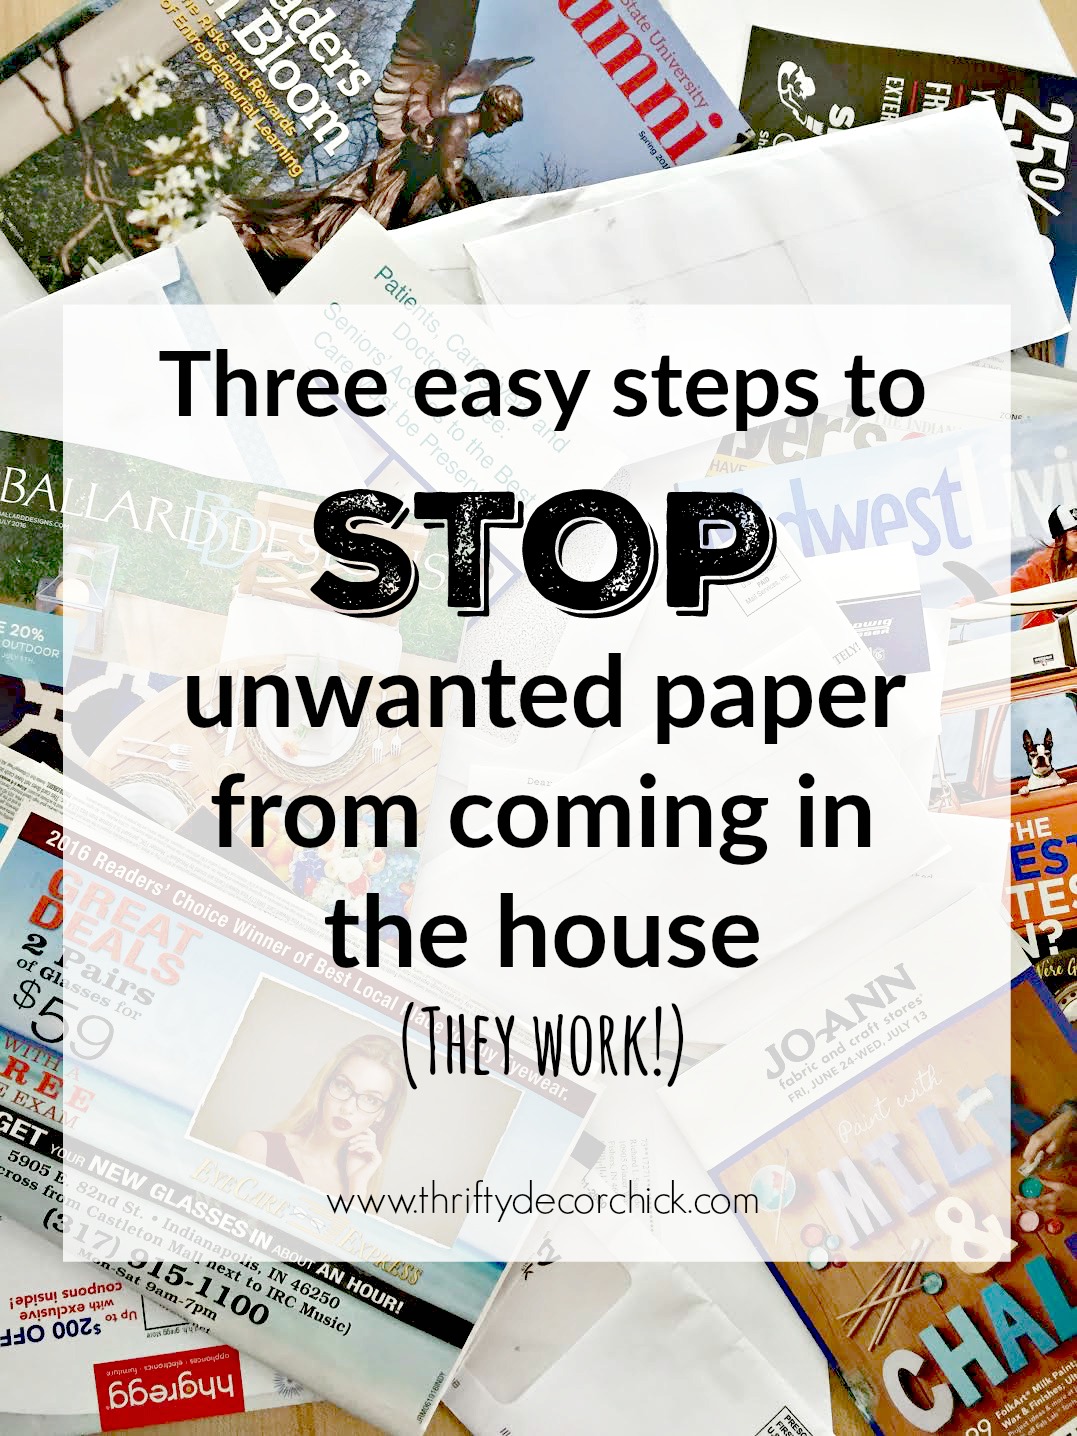 Tips for cutting down paper coming into the house